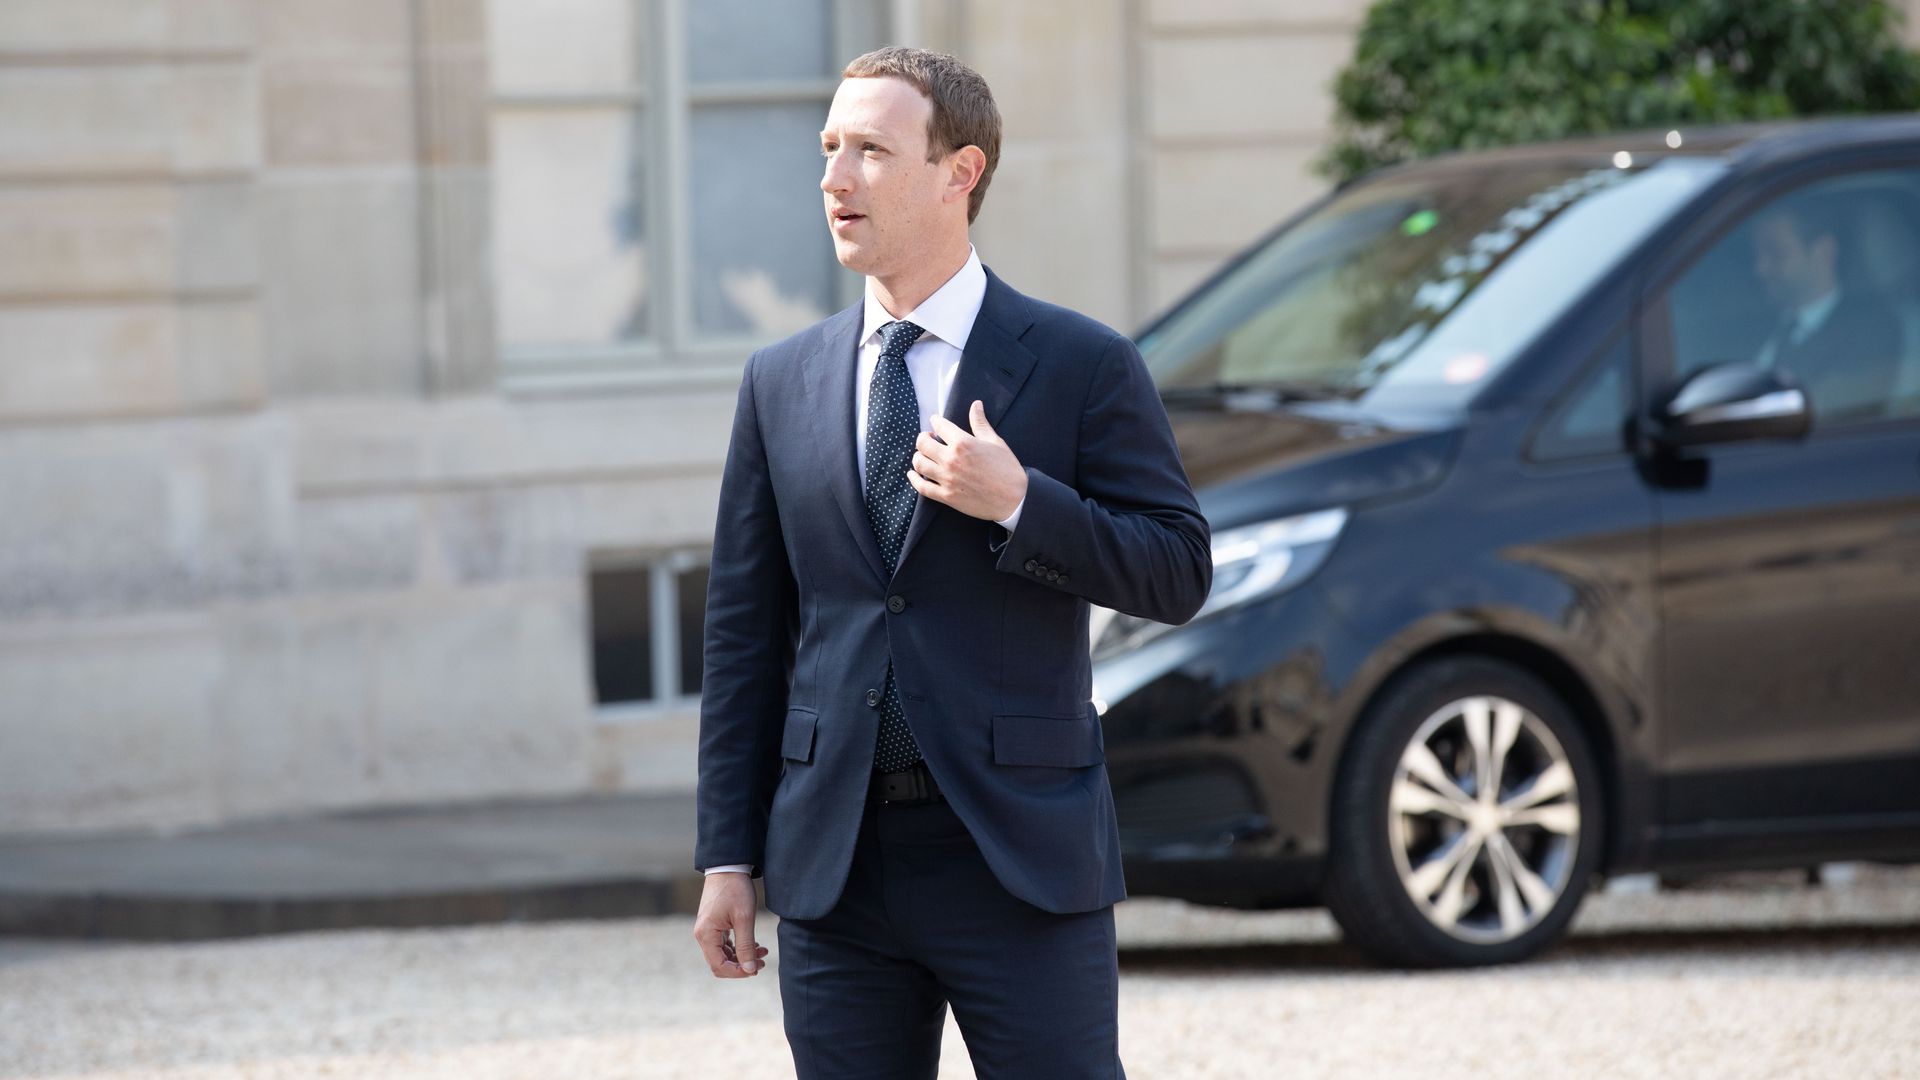 Mark Zuckerberg stands outside in a suit